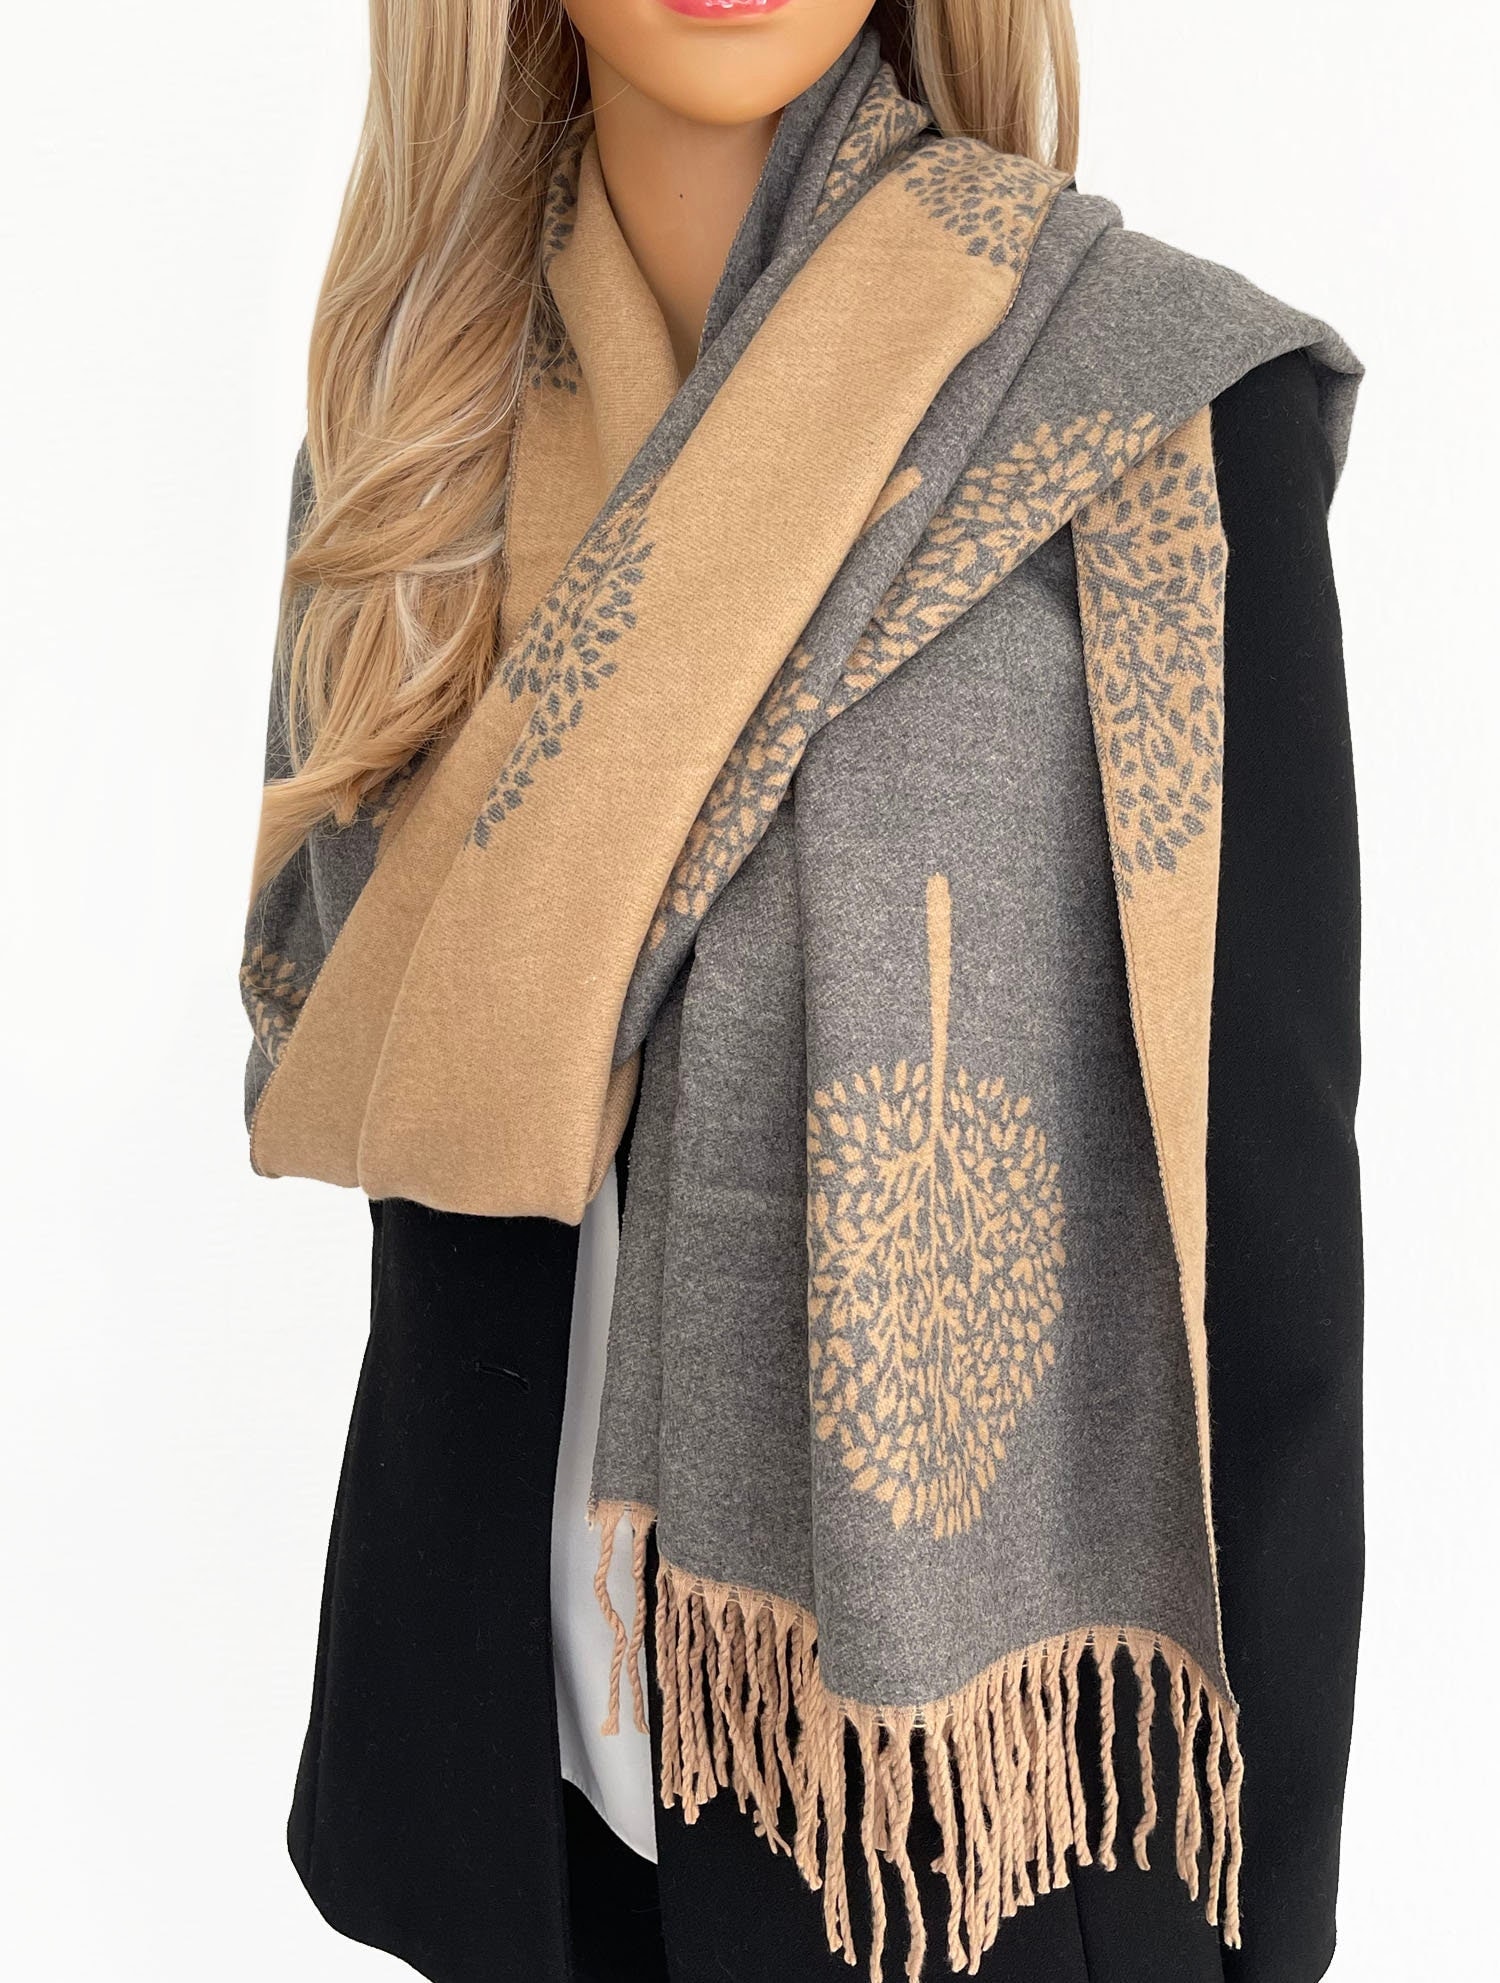 Beige Camel Mulberry Tree LUXURY Cashmere Scarf, Reversible Winter Shawl  Large Oversized Scarf Blanket Wrap, Tree of Life Print Gift for Her -   Canada